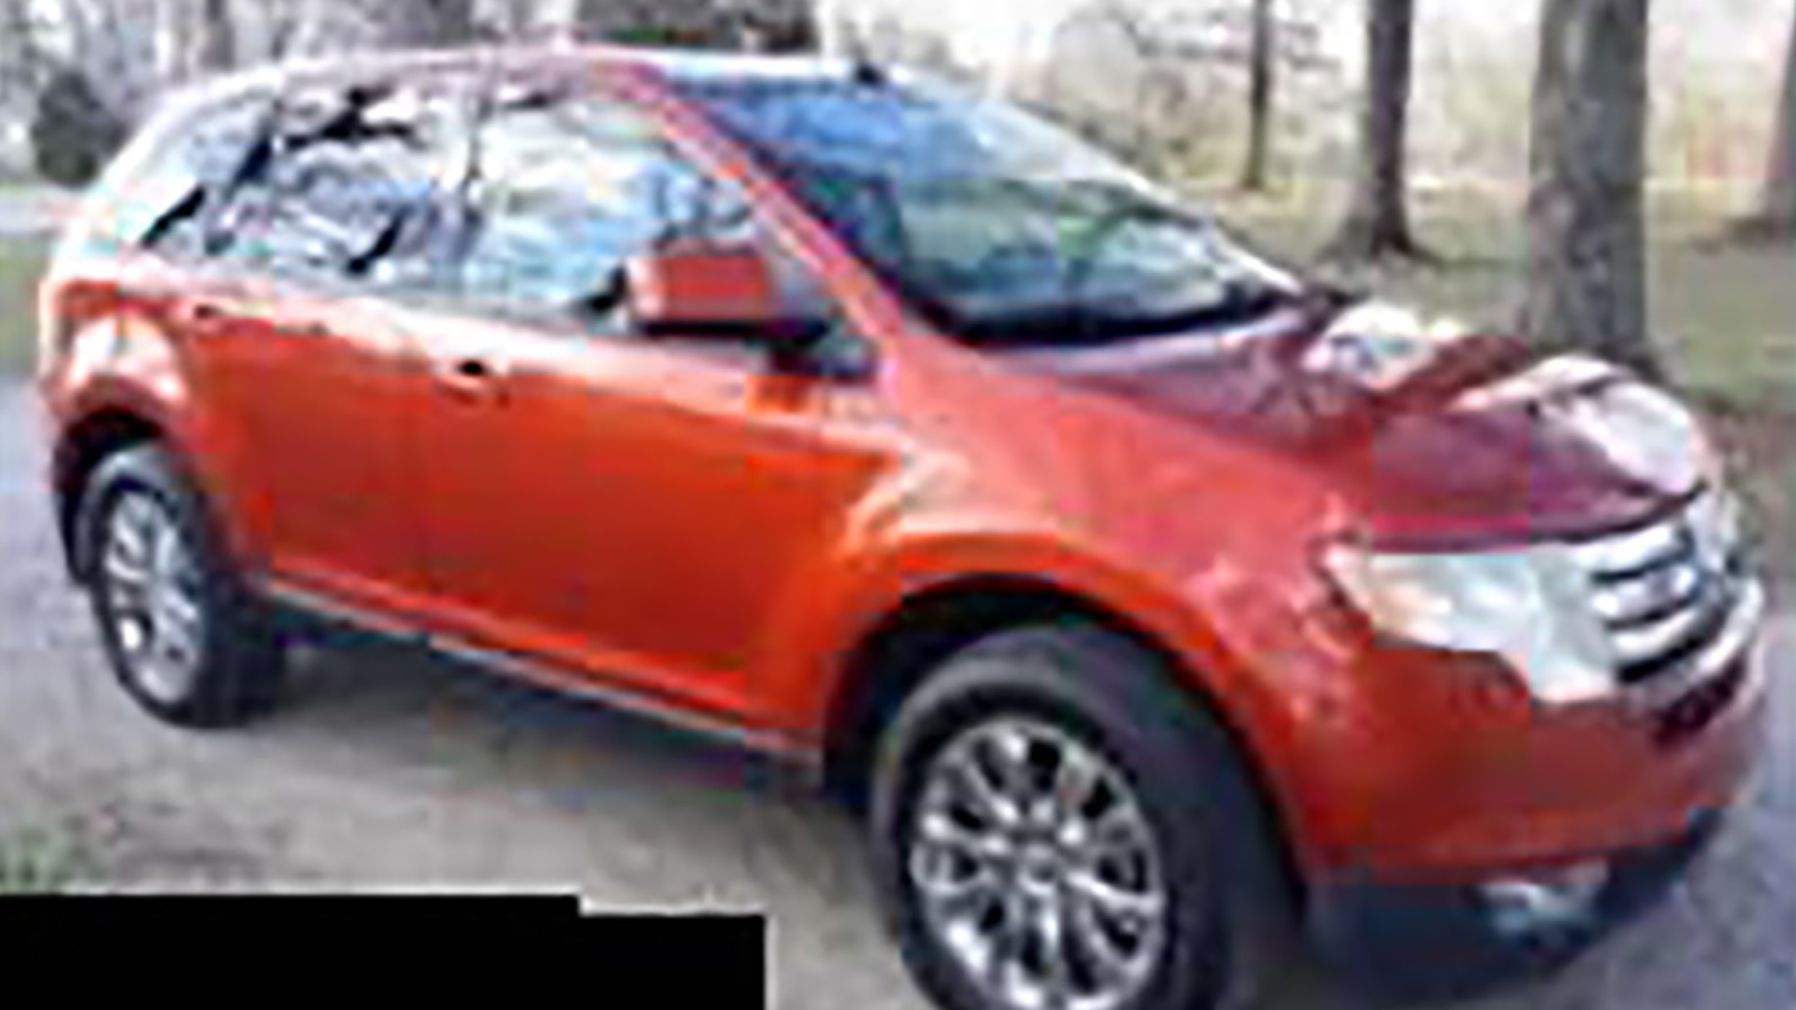 The gold/copper 2007 Ford Edge was the last car Vicky White and Casey White were believed to be last seen in on April 29, 2022. 